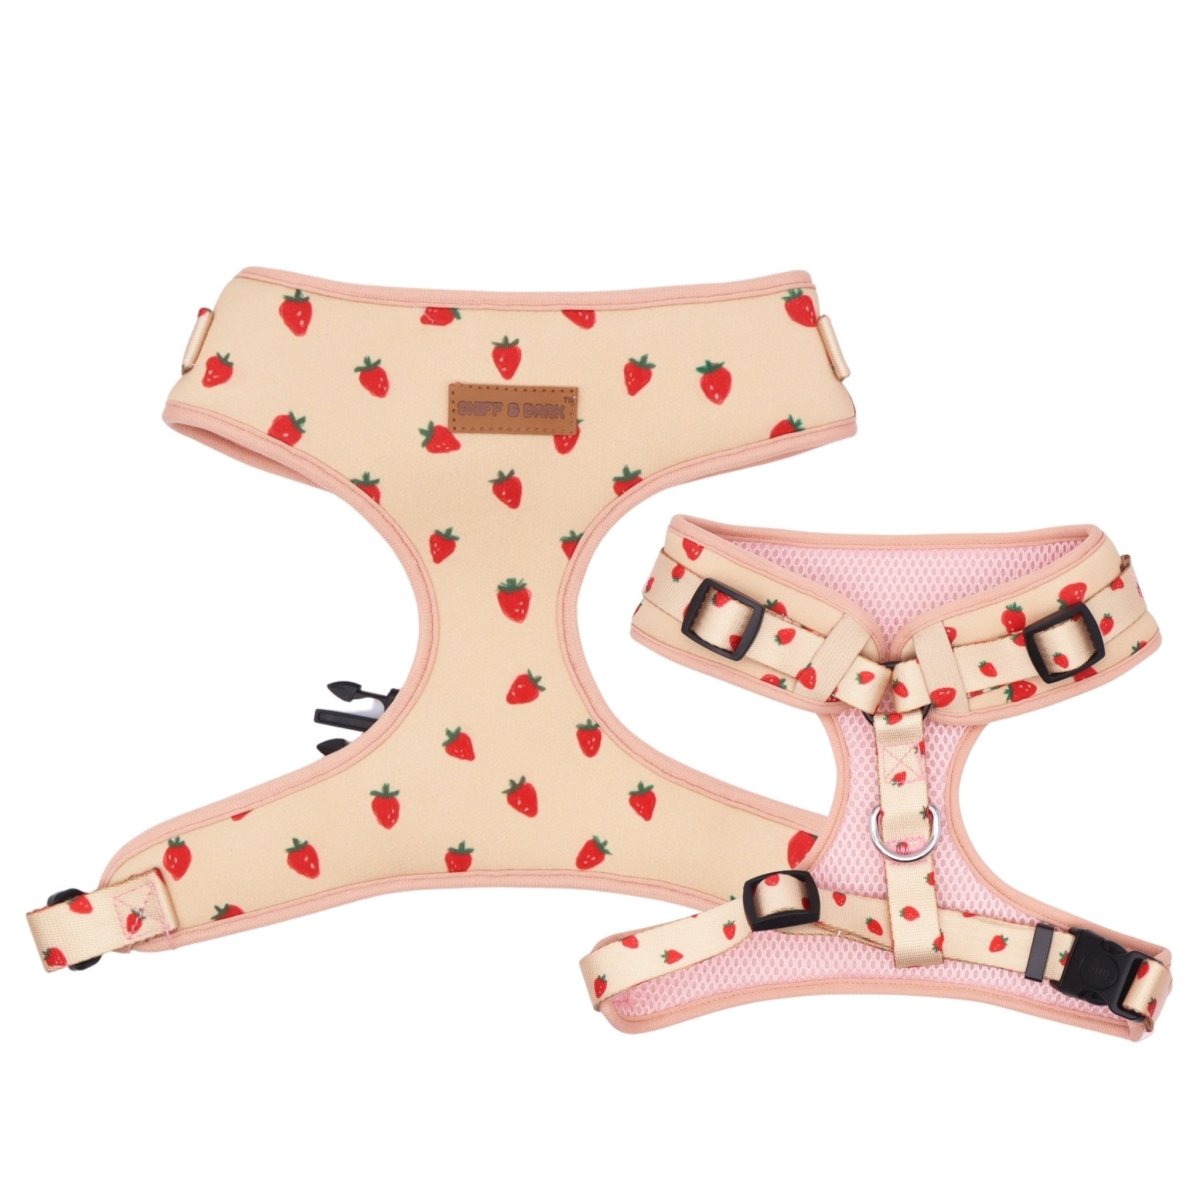 best dog harness for walking - Strawberry pattern harness for dogs boys and girls